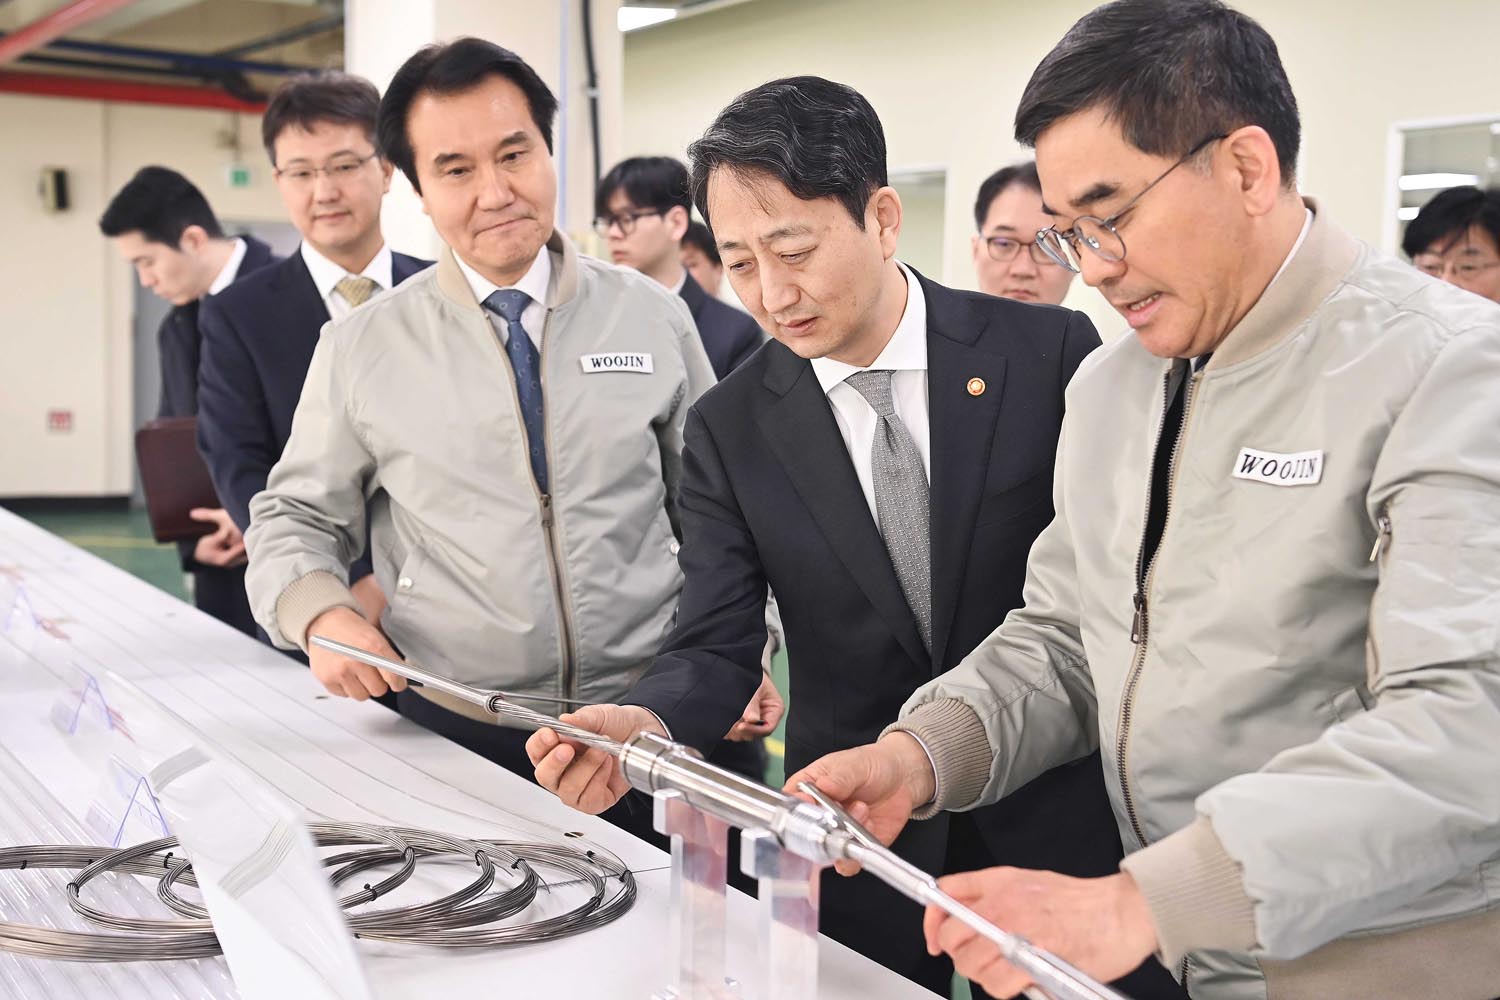 Minister Ahn visits nuclear incore instrument producer Woojin